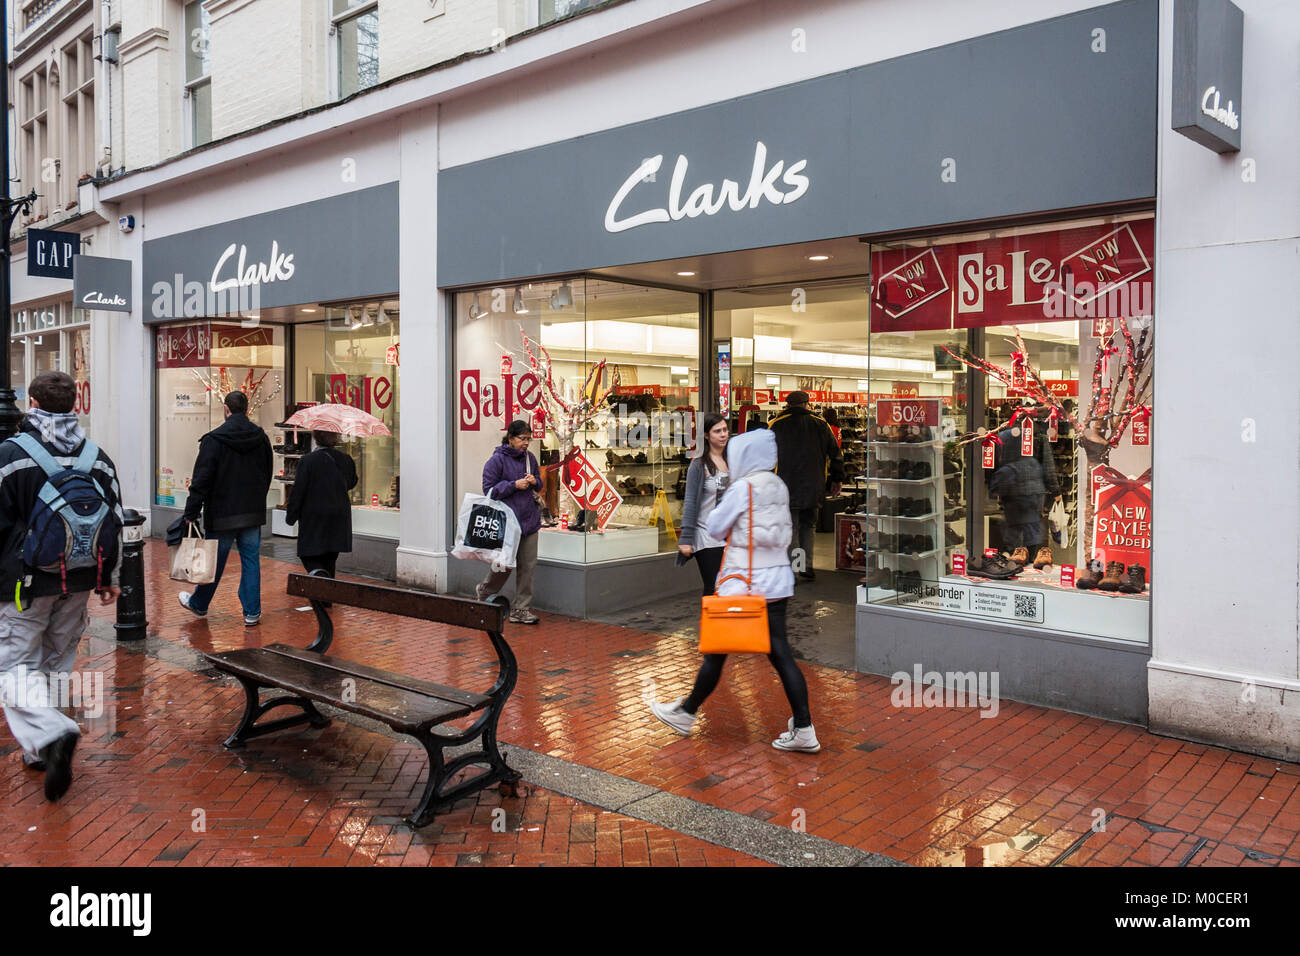 clarks shoes stores in kuwait